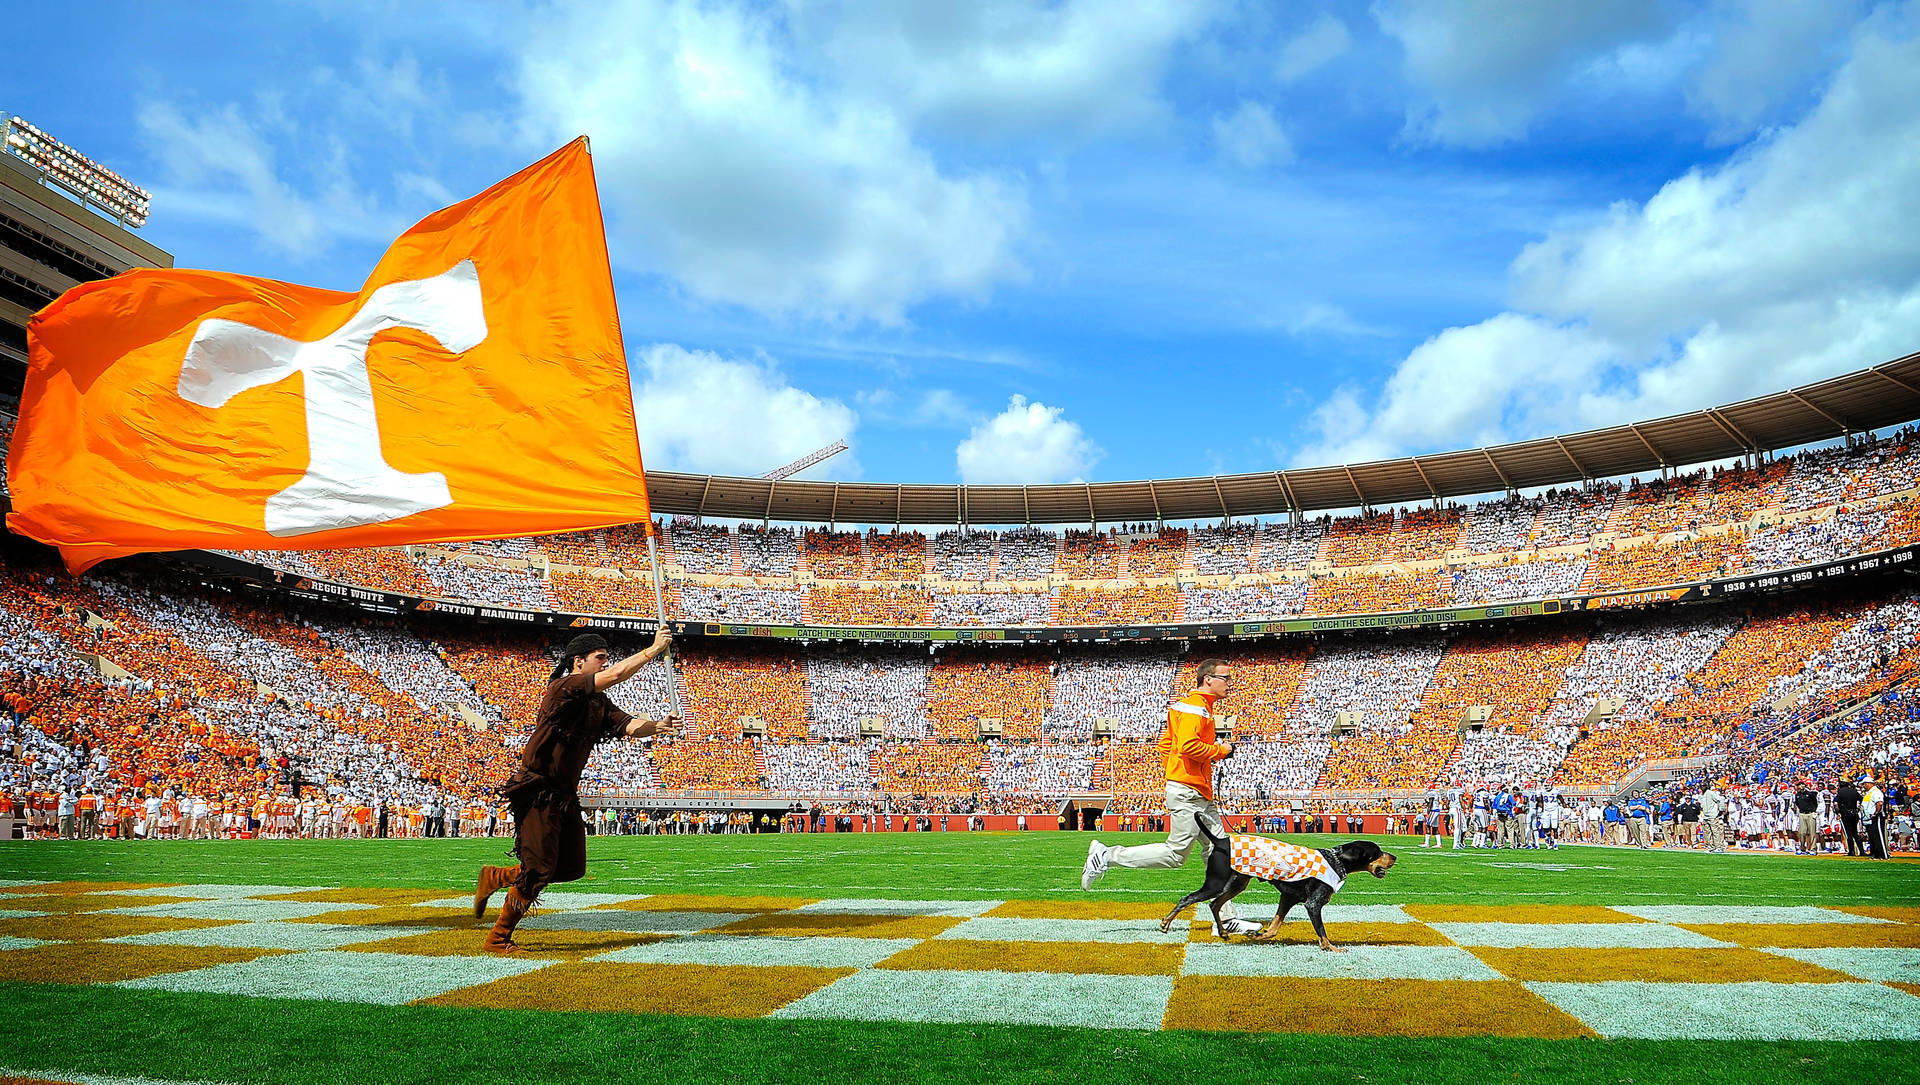 University Of Tennessee Flag In Stadium Picture